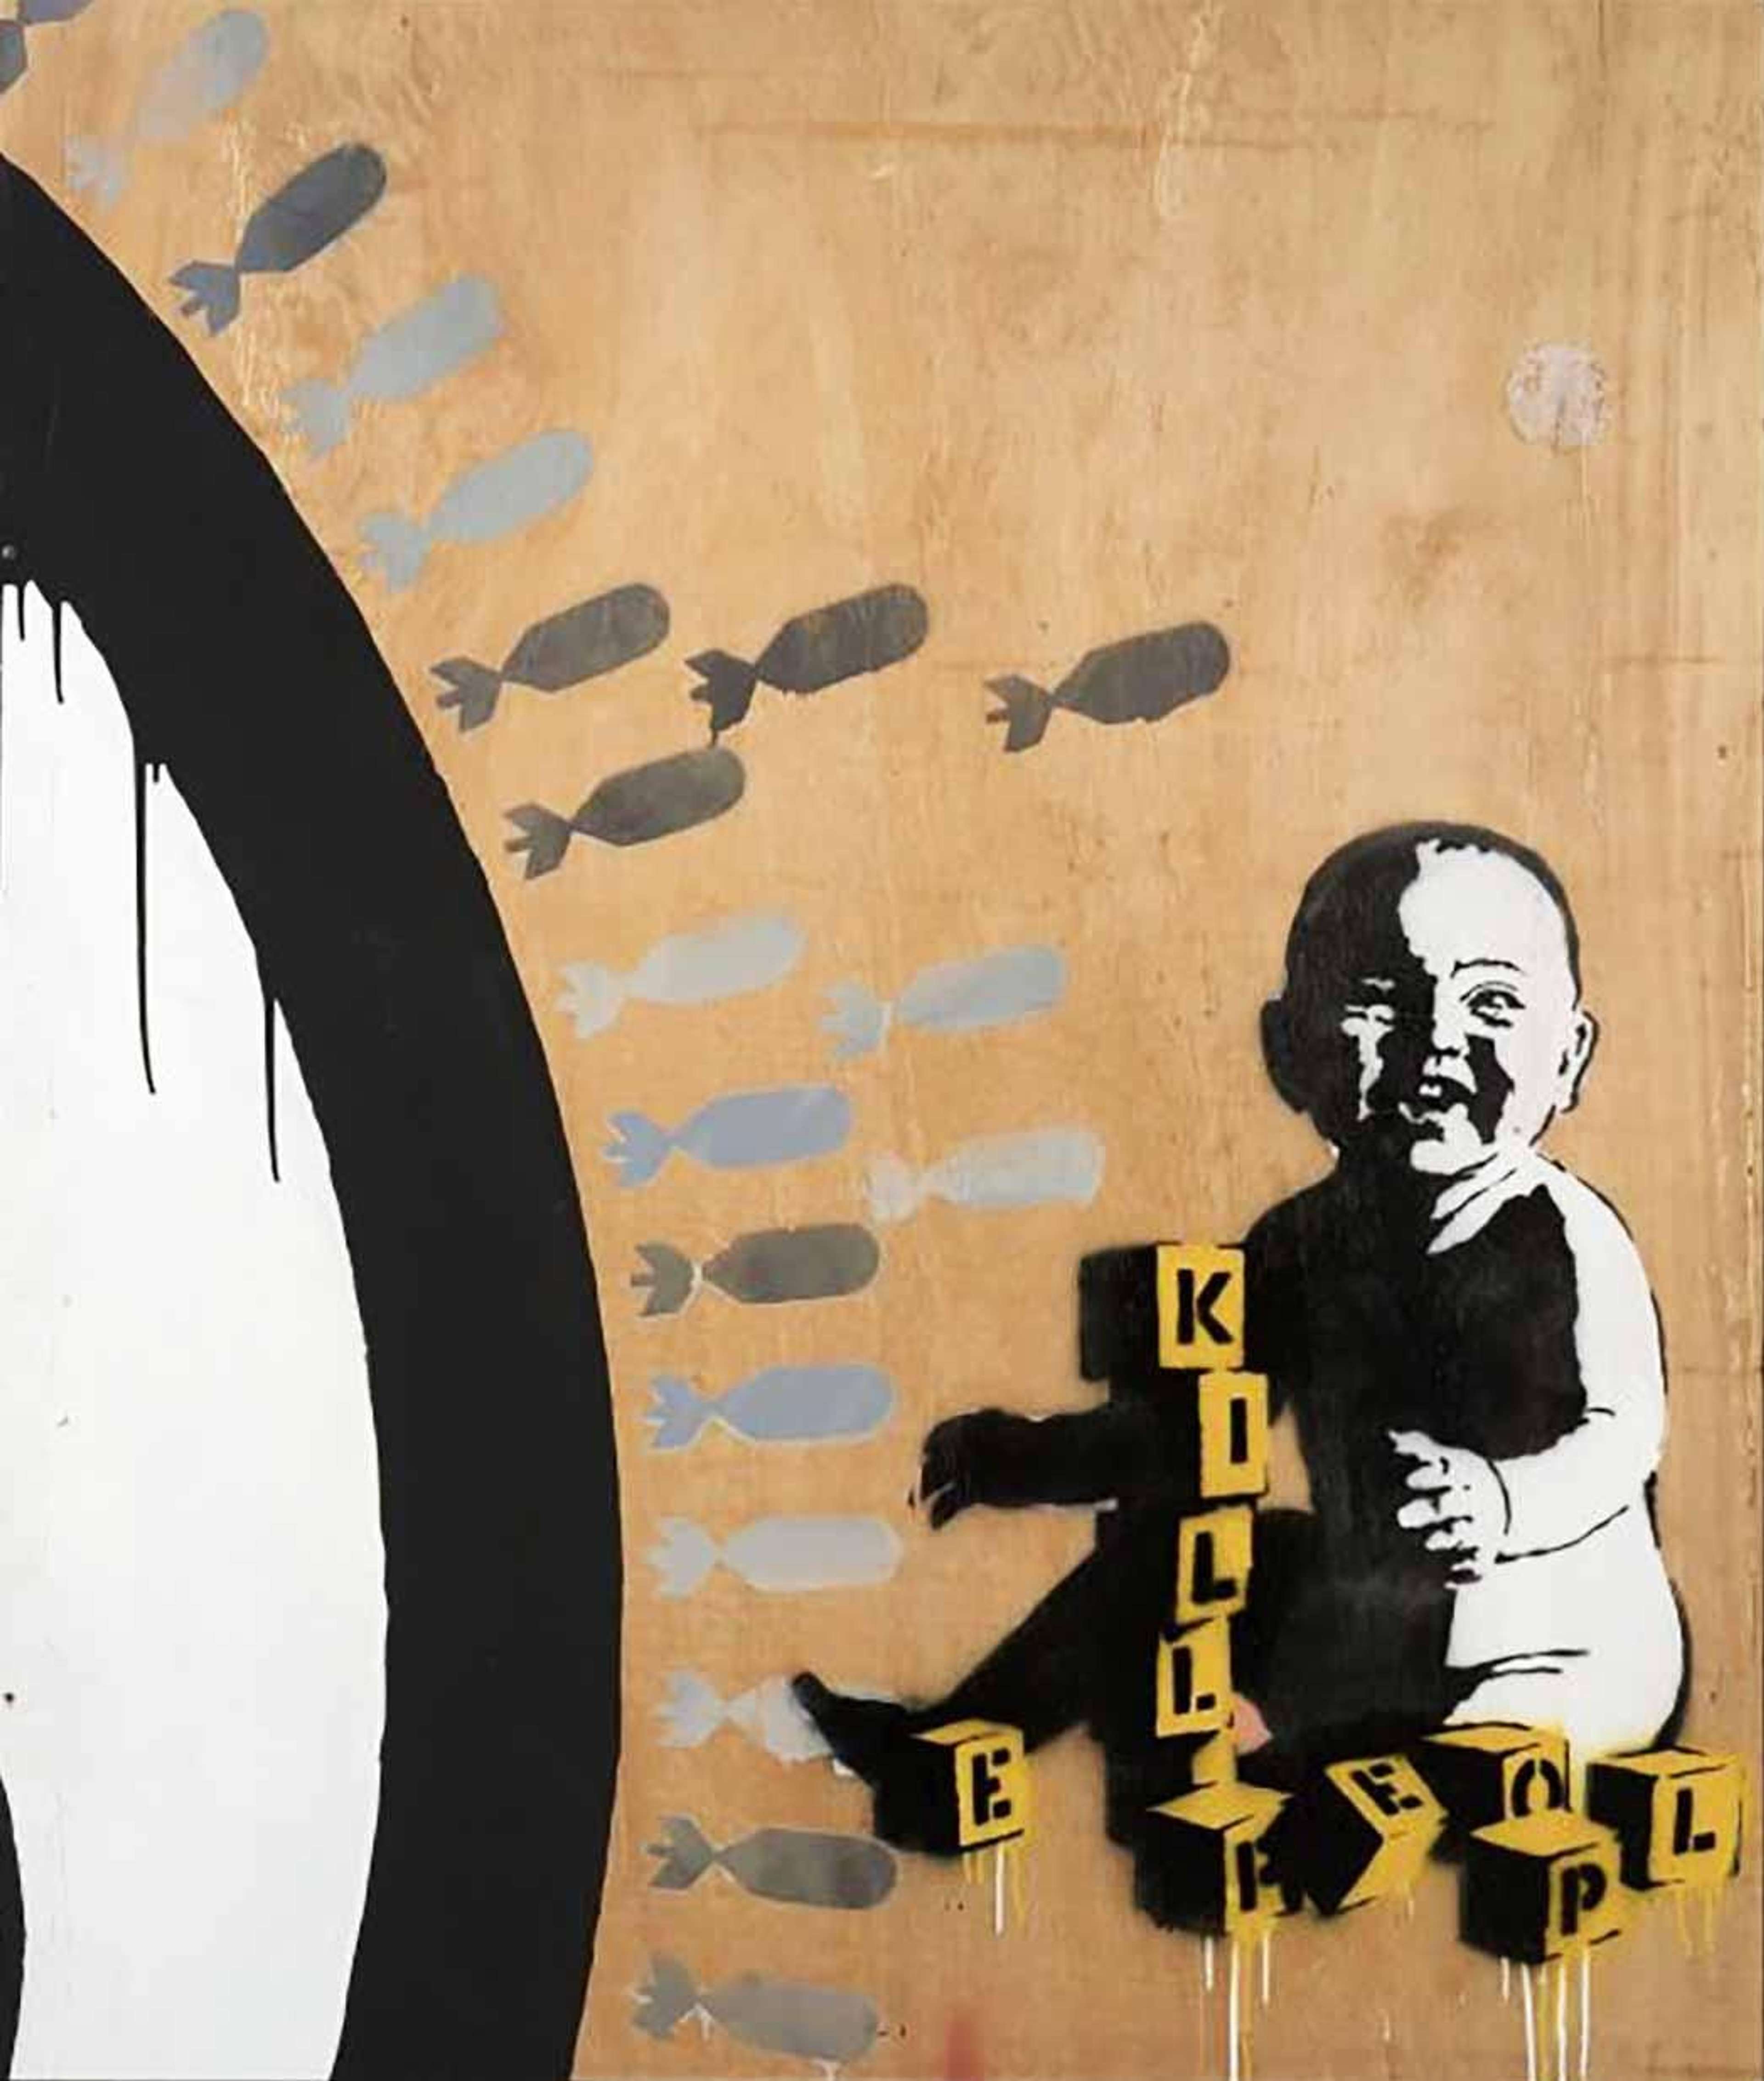 Banksy’s Kill People. A spray paint work of an infant playing with blocks that read “KILL PEOPLE” with missiles being launched toward the child. 